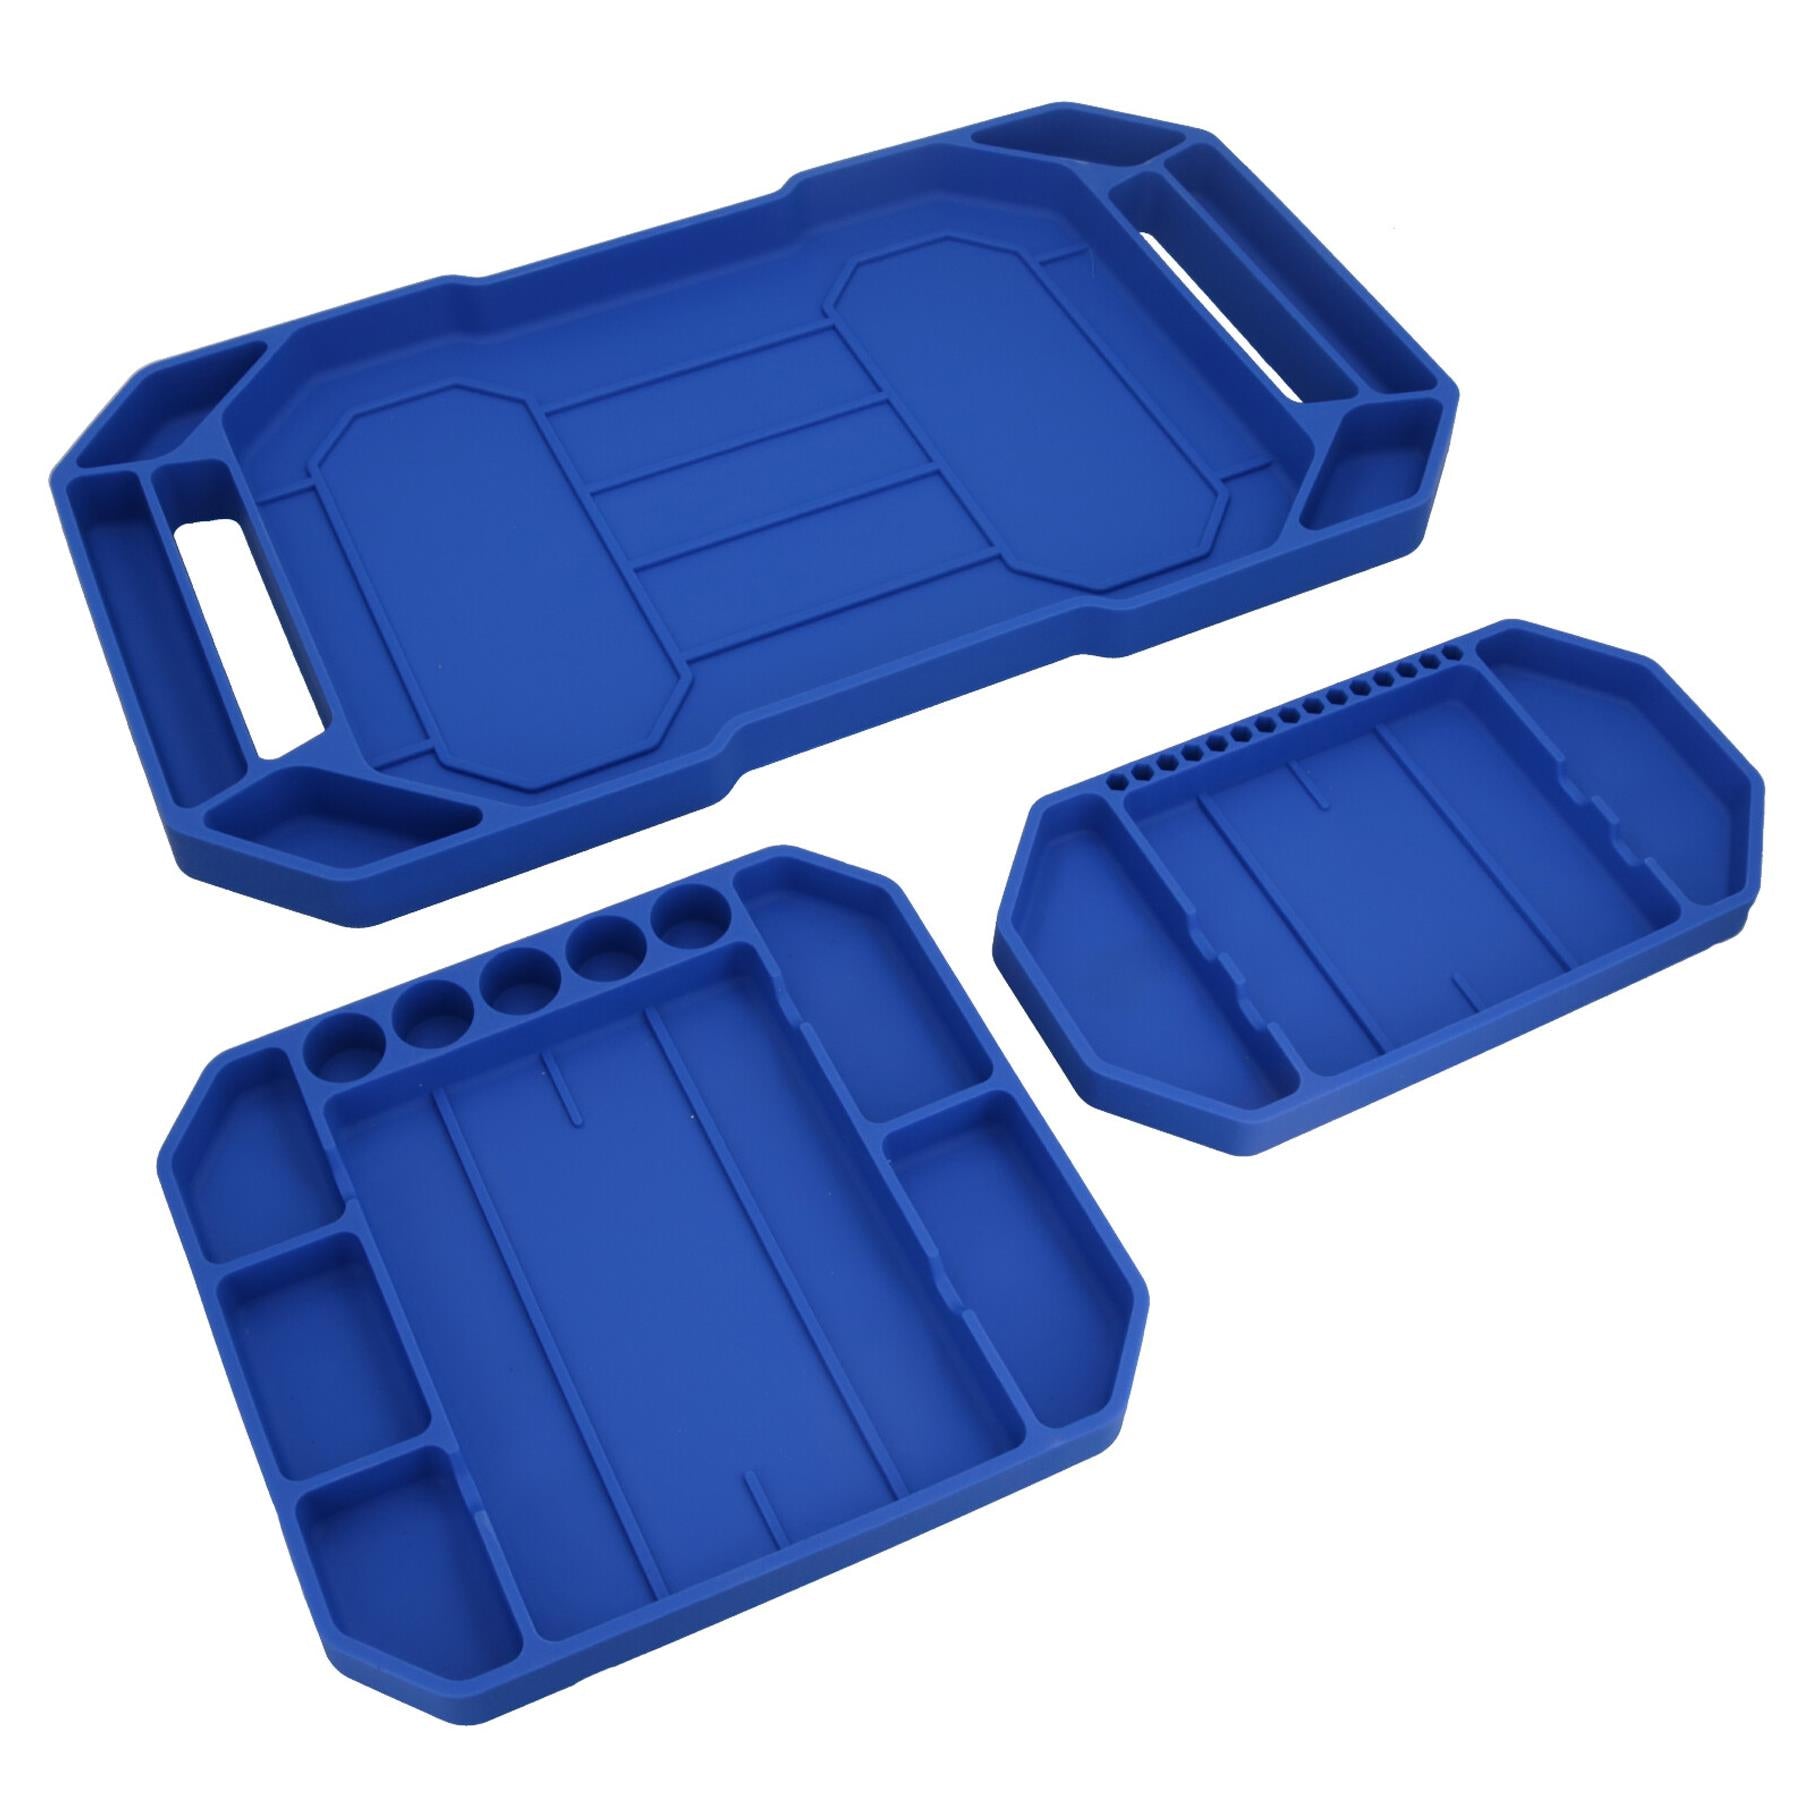 Non Slip Flexible Tool Trays Organiser Tool Box Compartments Oil Resistant 3pc